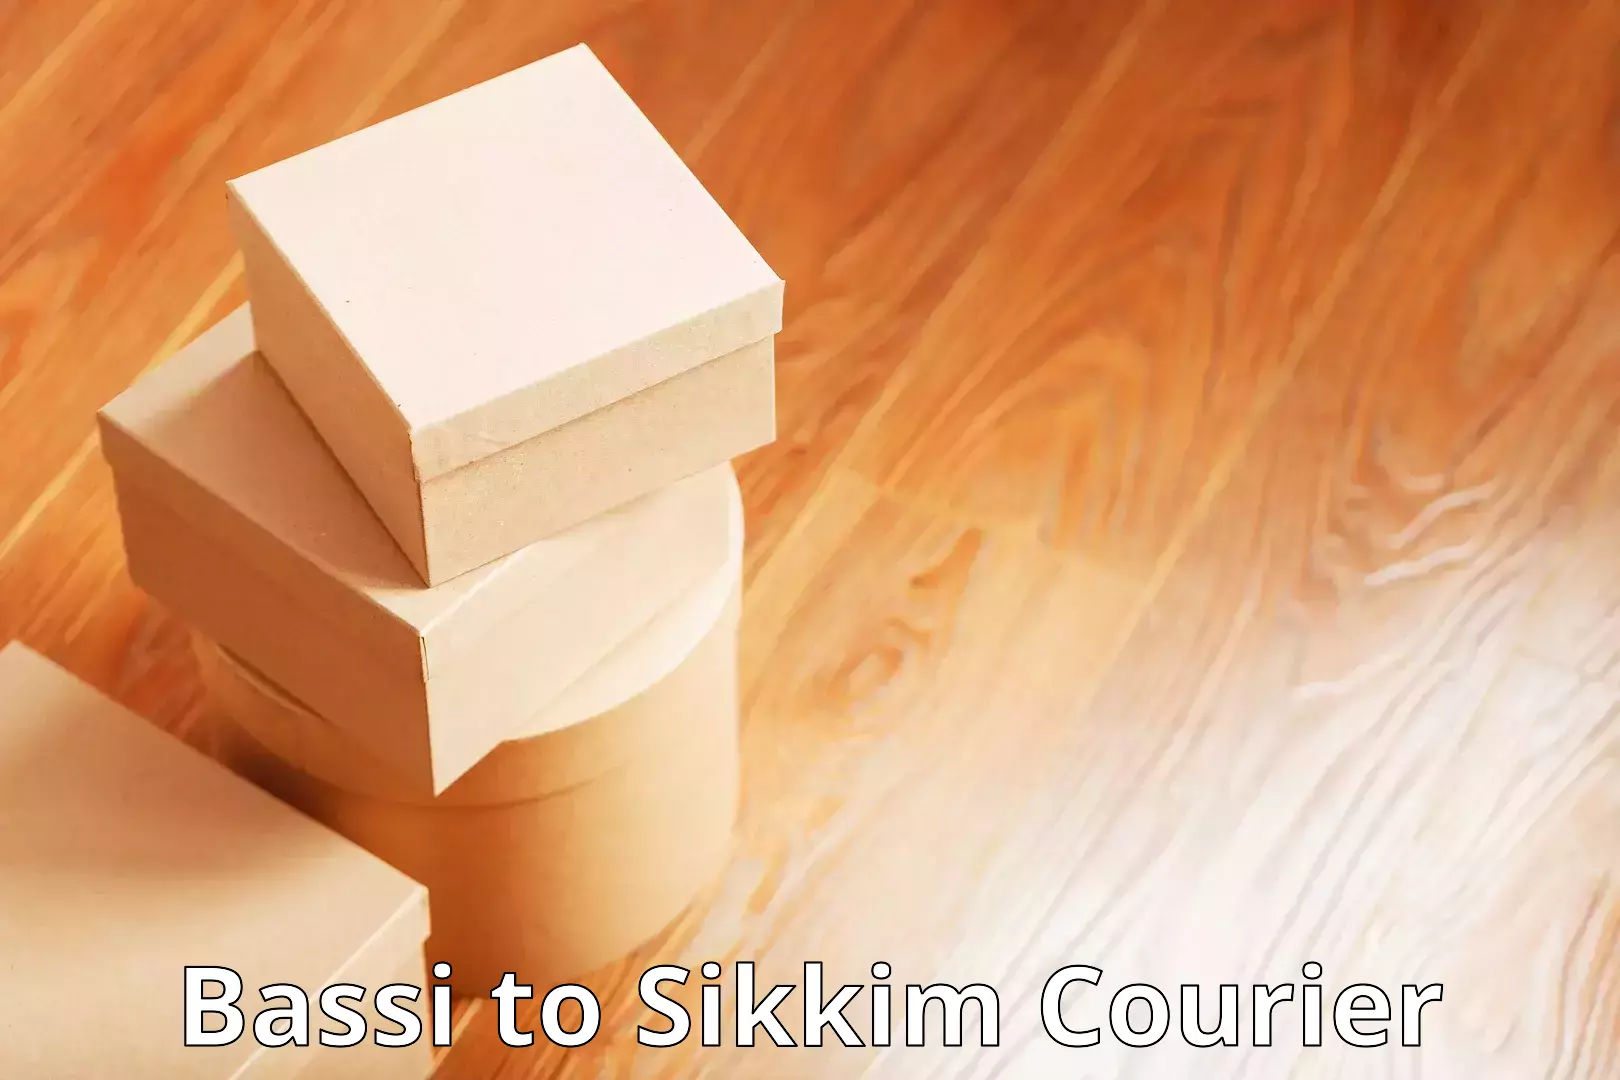 Multi-city courier Bassi to East Sikkim